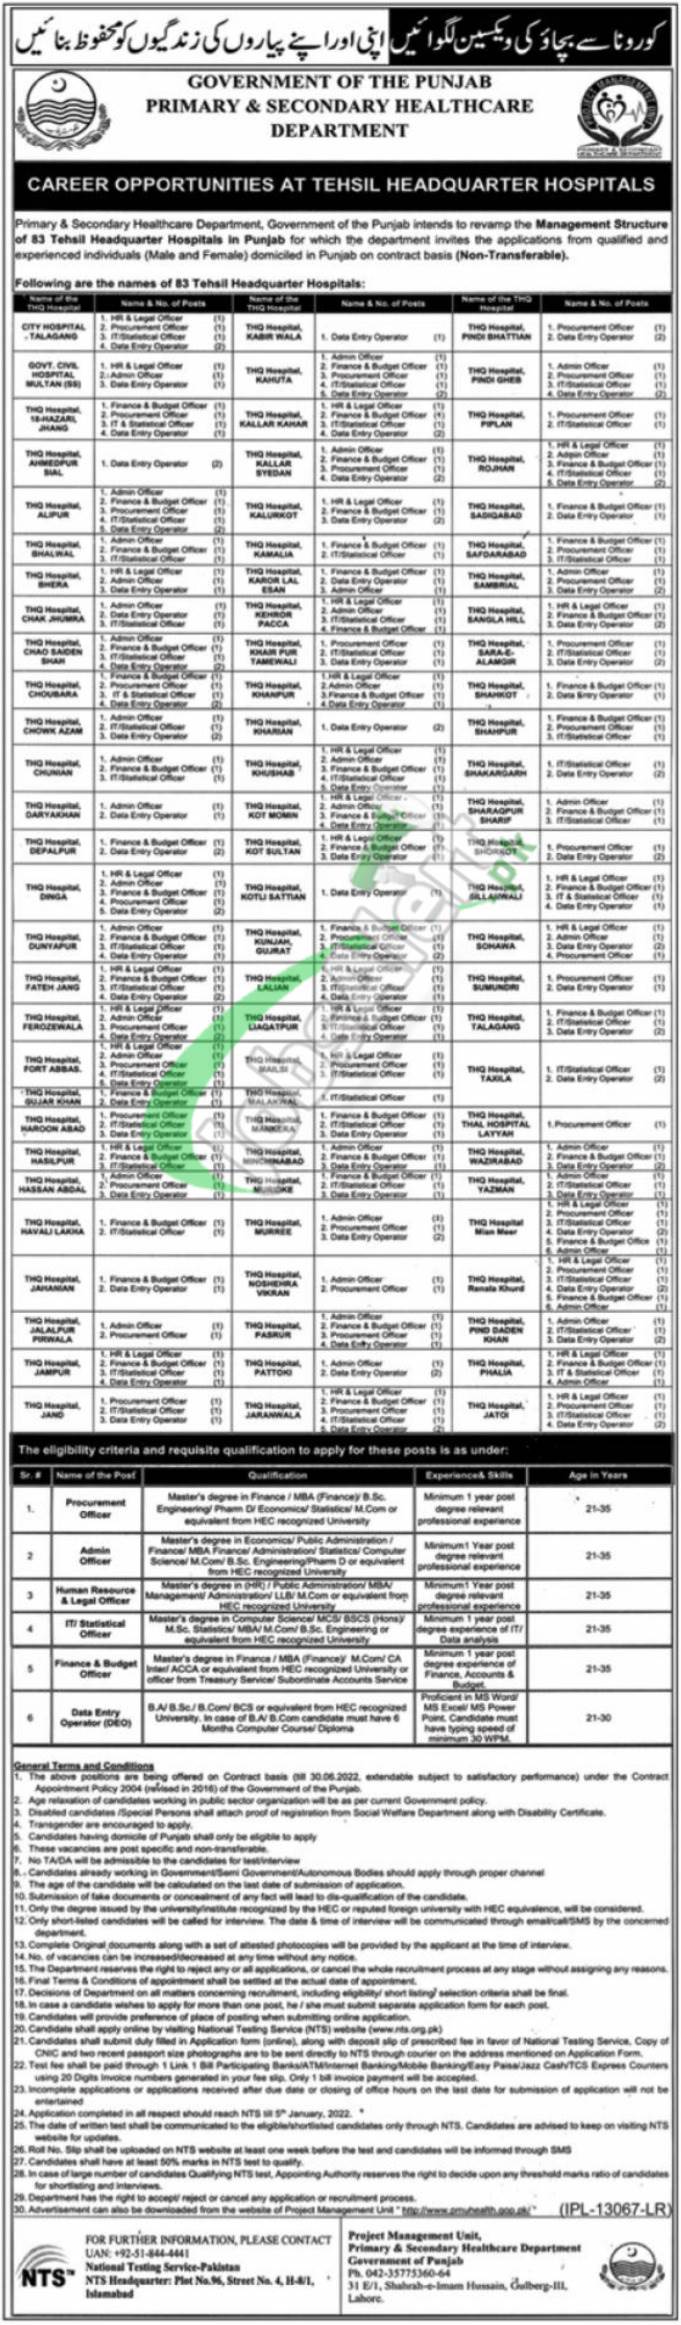 Primary & Secondary Healthcare Department Punjab Jobs